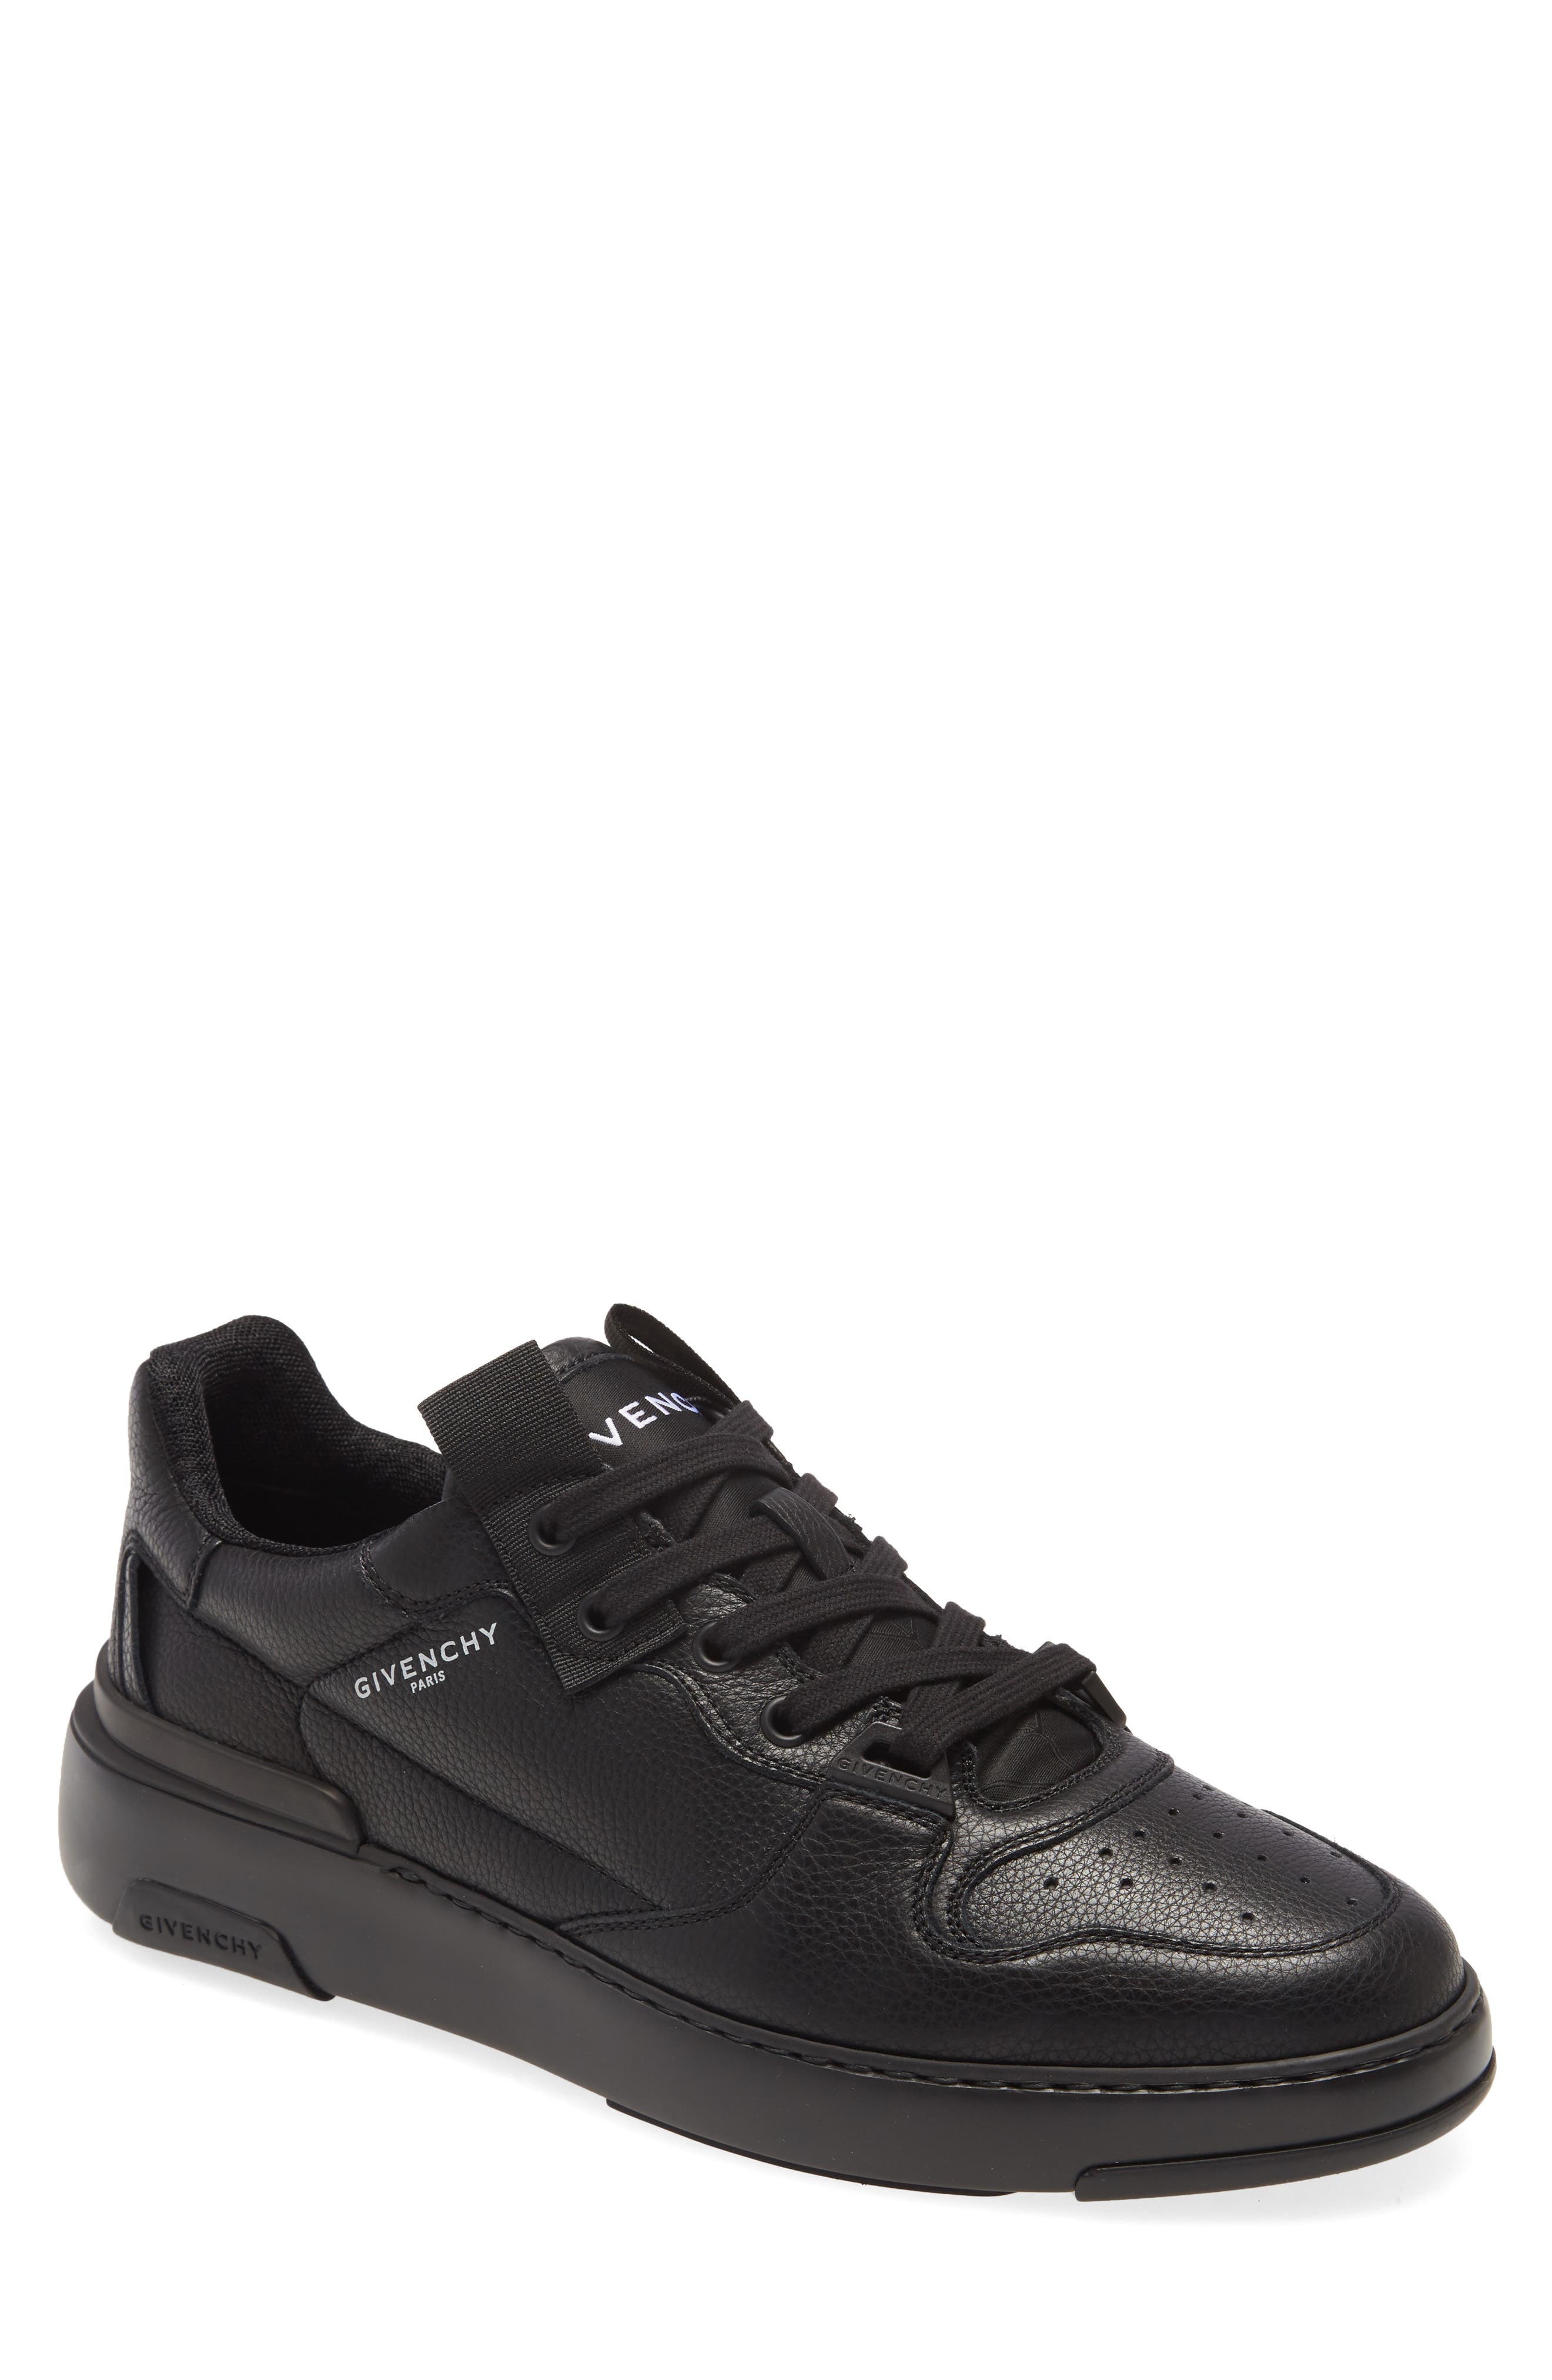 givenchy sneakers nordstrom